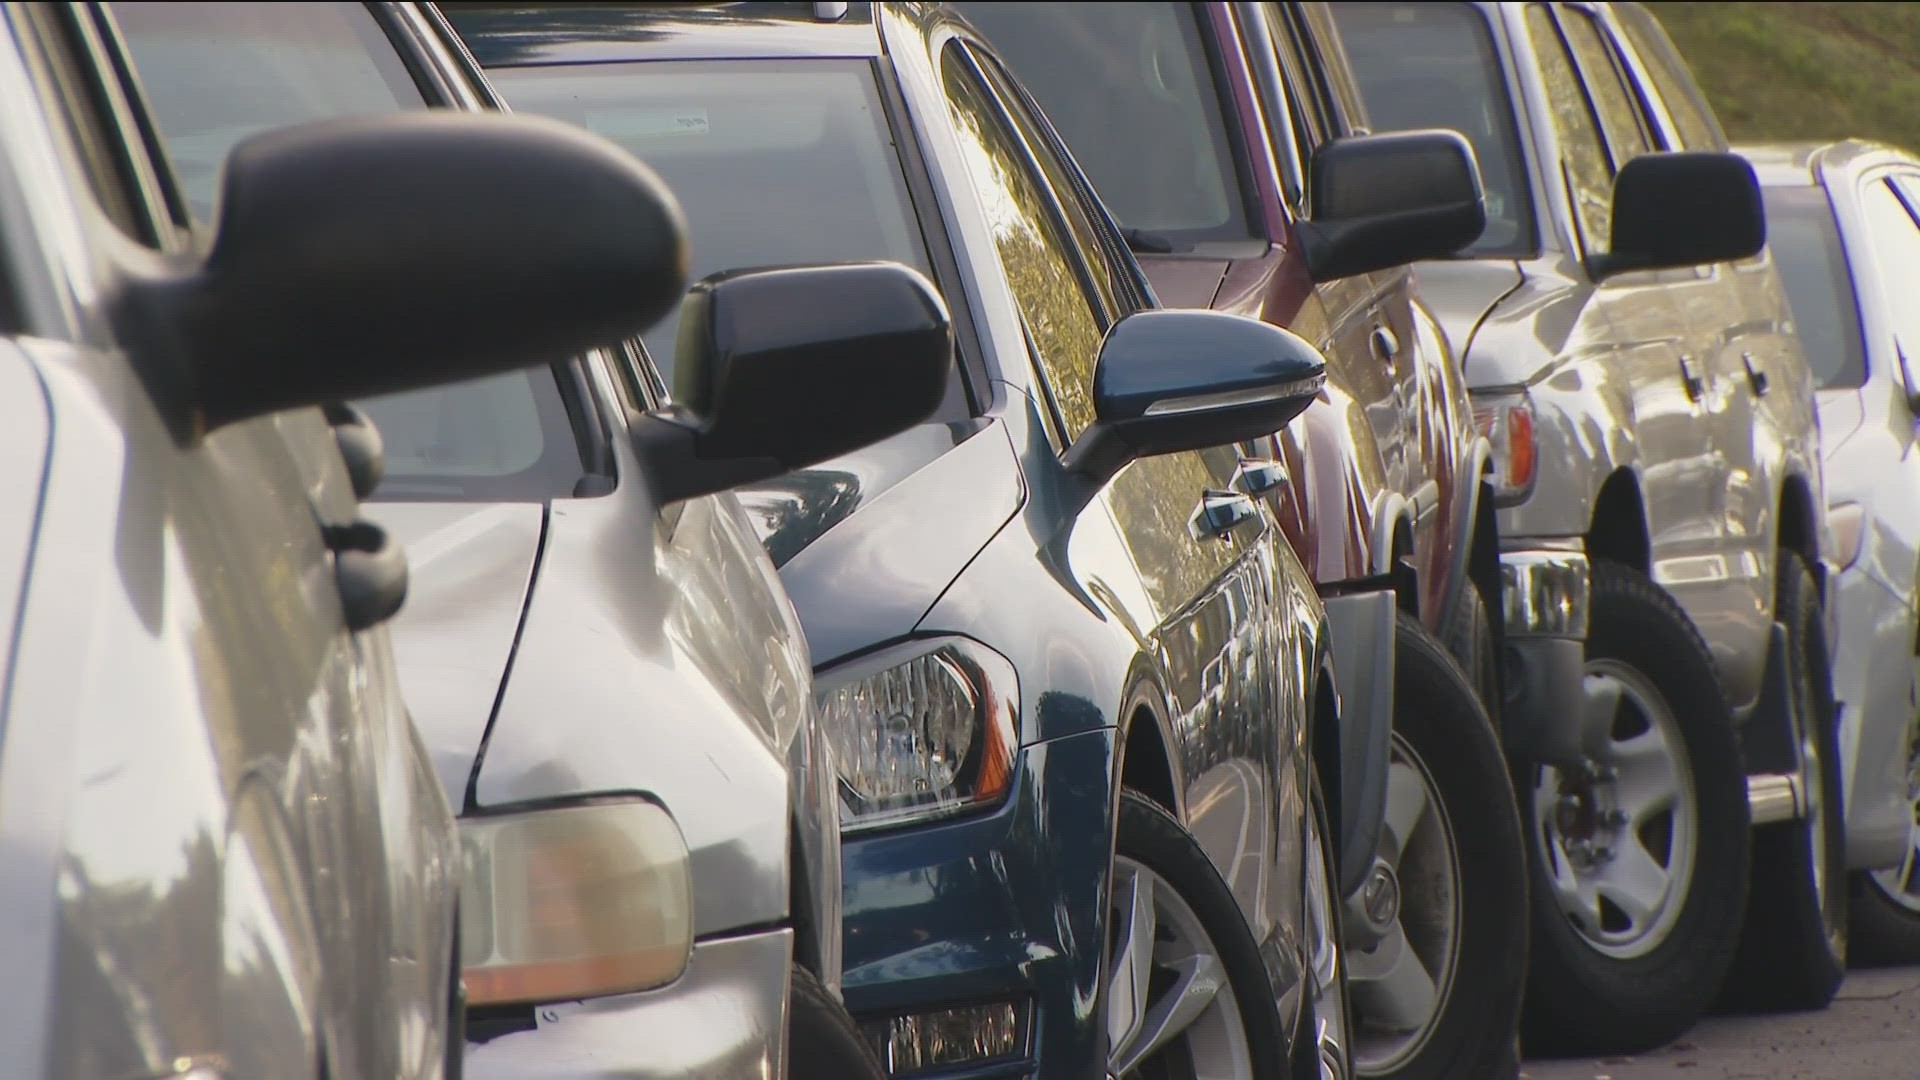 Some residents in an Encinitas neighborhood will soon have to pay for a parking permit if they want to park their cars.